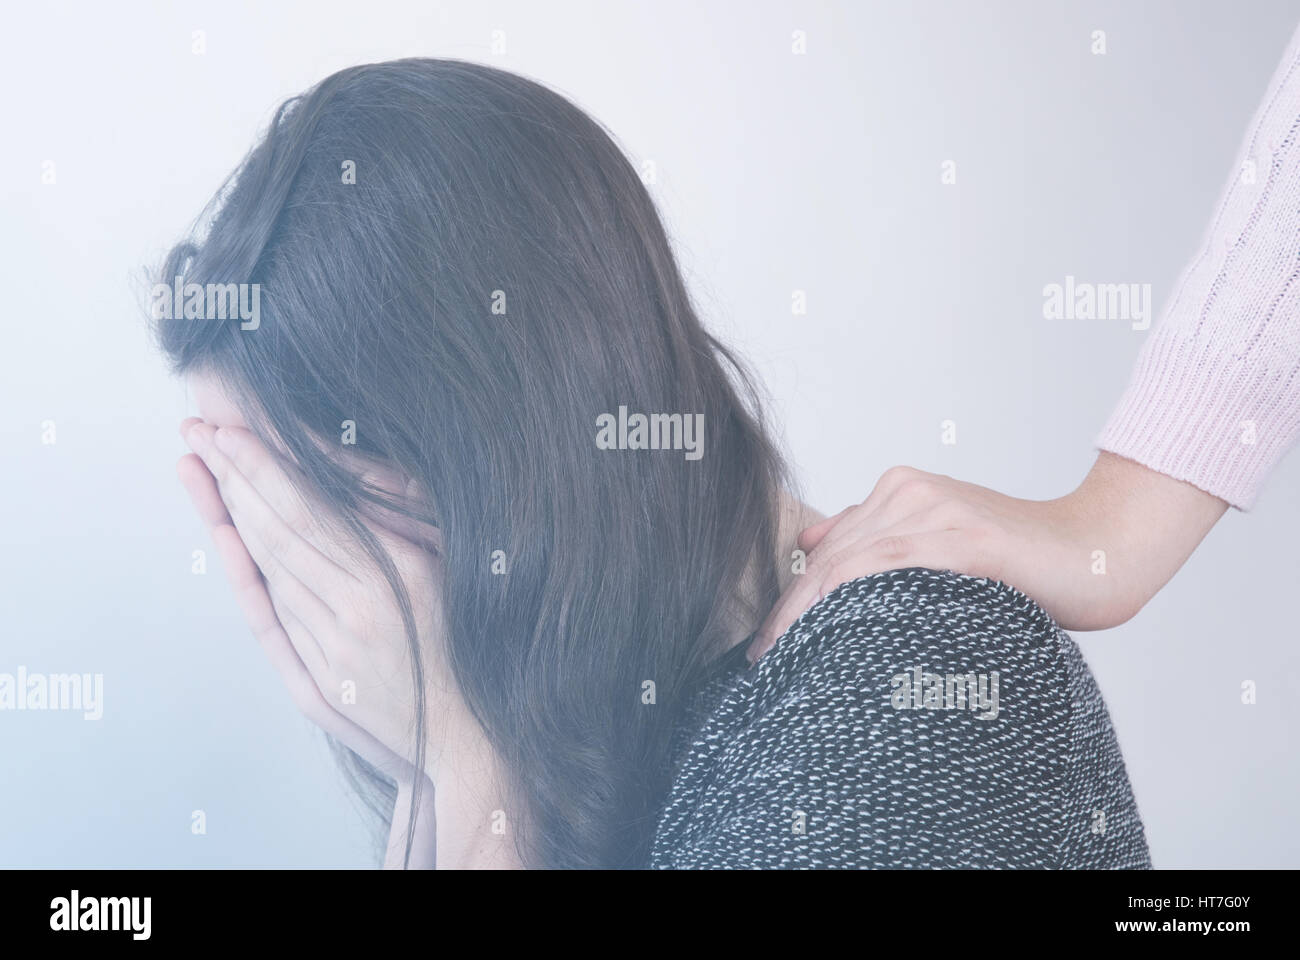 depressed teenage girl covering her face and a hand offering help Stock Photo